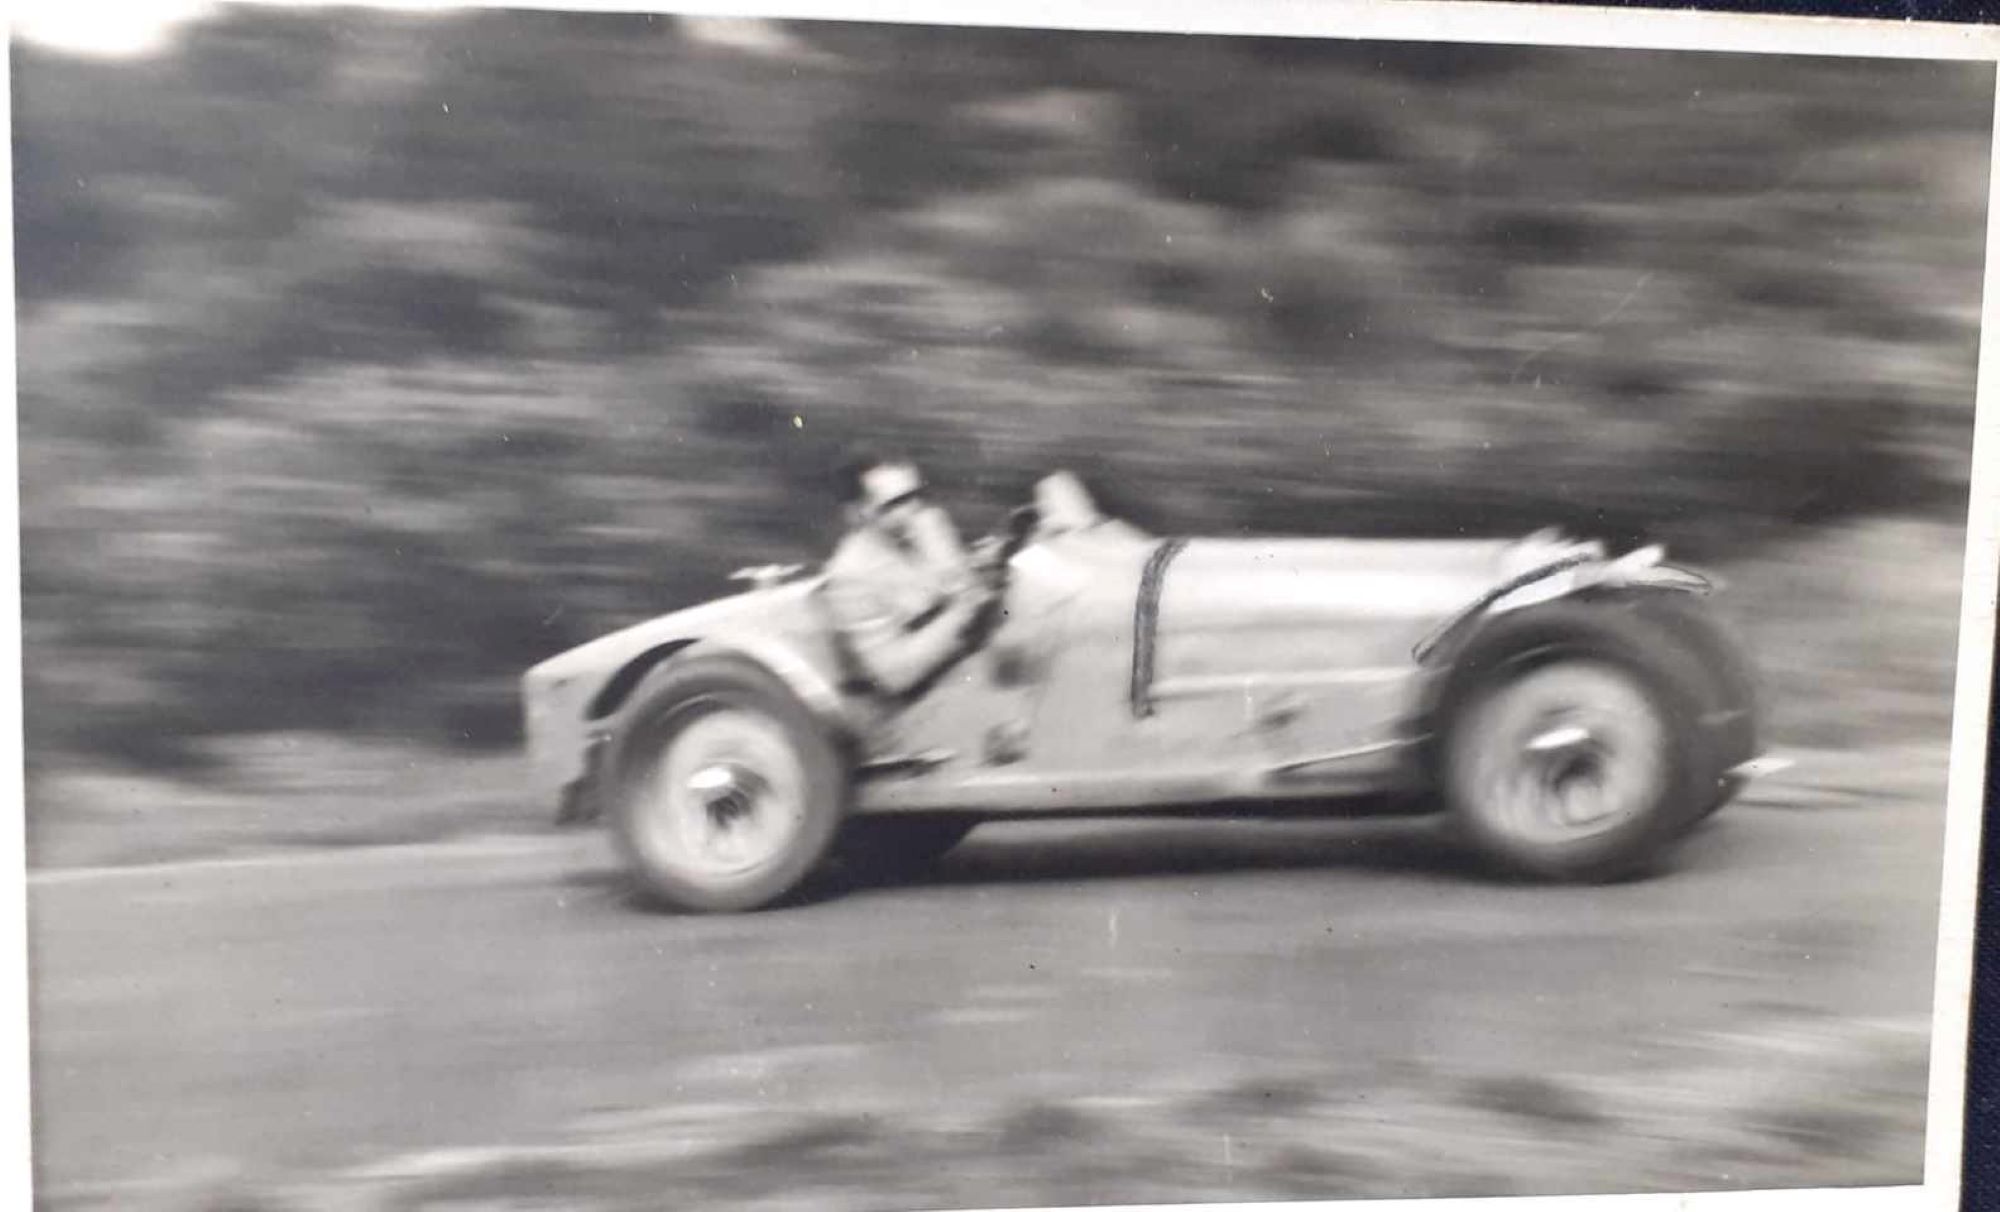 Name:  NSCC 1950 #0116 Bugatti T35 at speed - light colour 1950's - image Graeme Wells arch Anthony Wel.jpg
Views: 162
Size:  158.1 KB